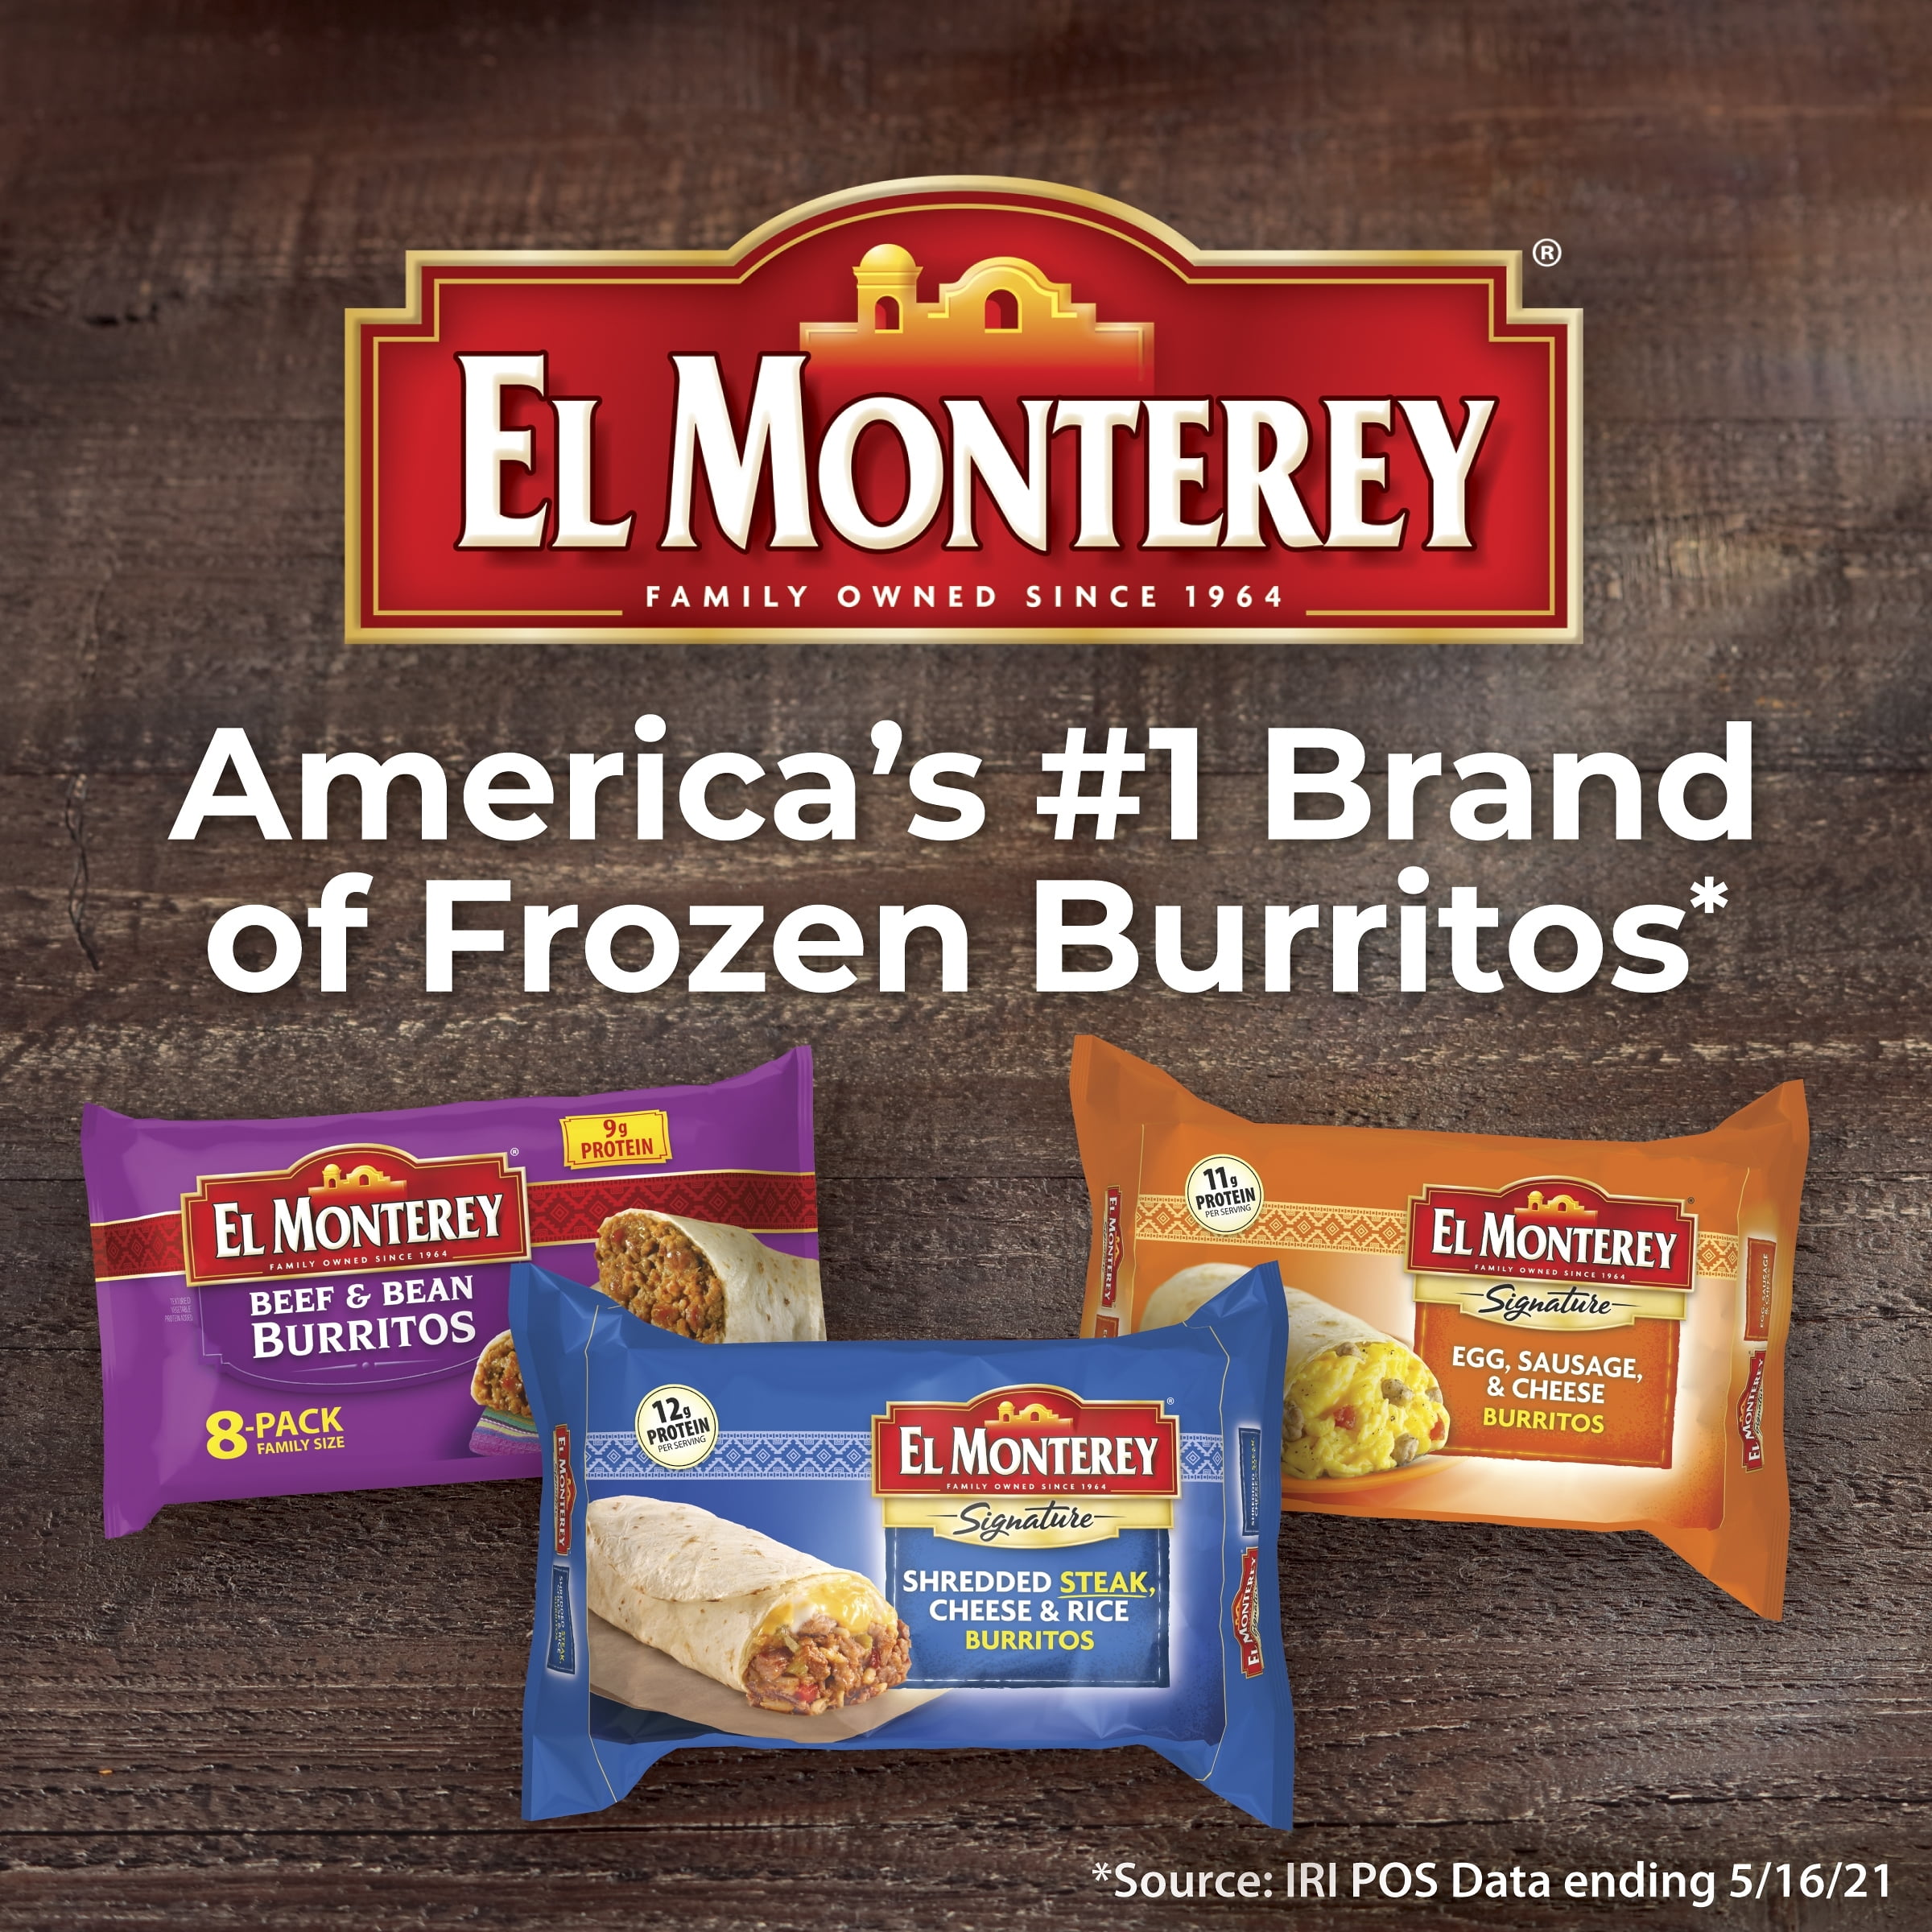 Save on El Monterey Chimichangas Beef & Bean Family Pack - 8 ct Order  Online Delivery